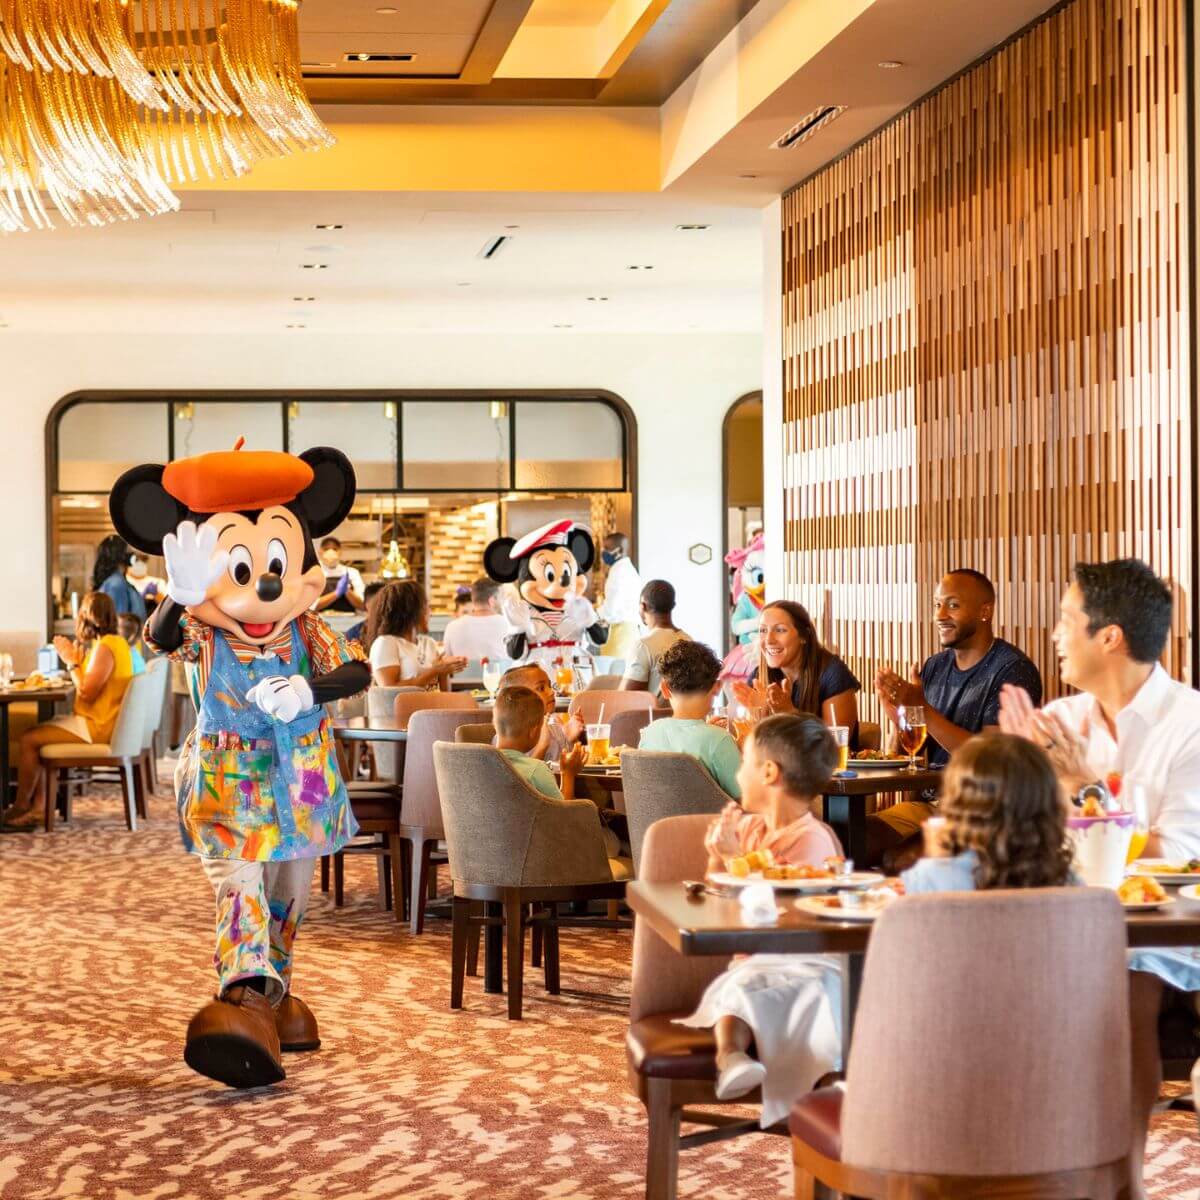 Photo of Mickey Mouse wearing an artist's smock while meeting guests at Topolino's Terrace at Disney's Riviera Resort. Minnie Mouse and Daisy can be seen in the background.